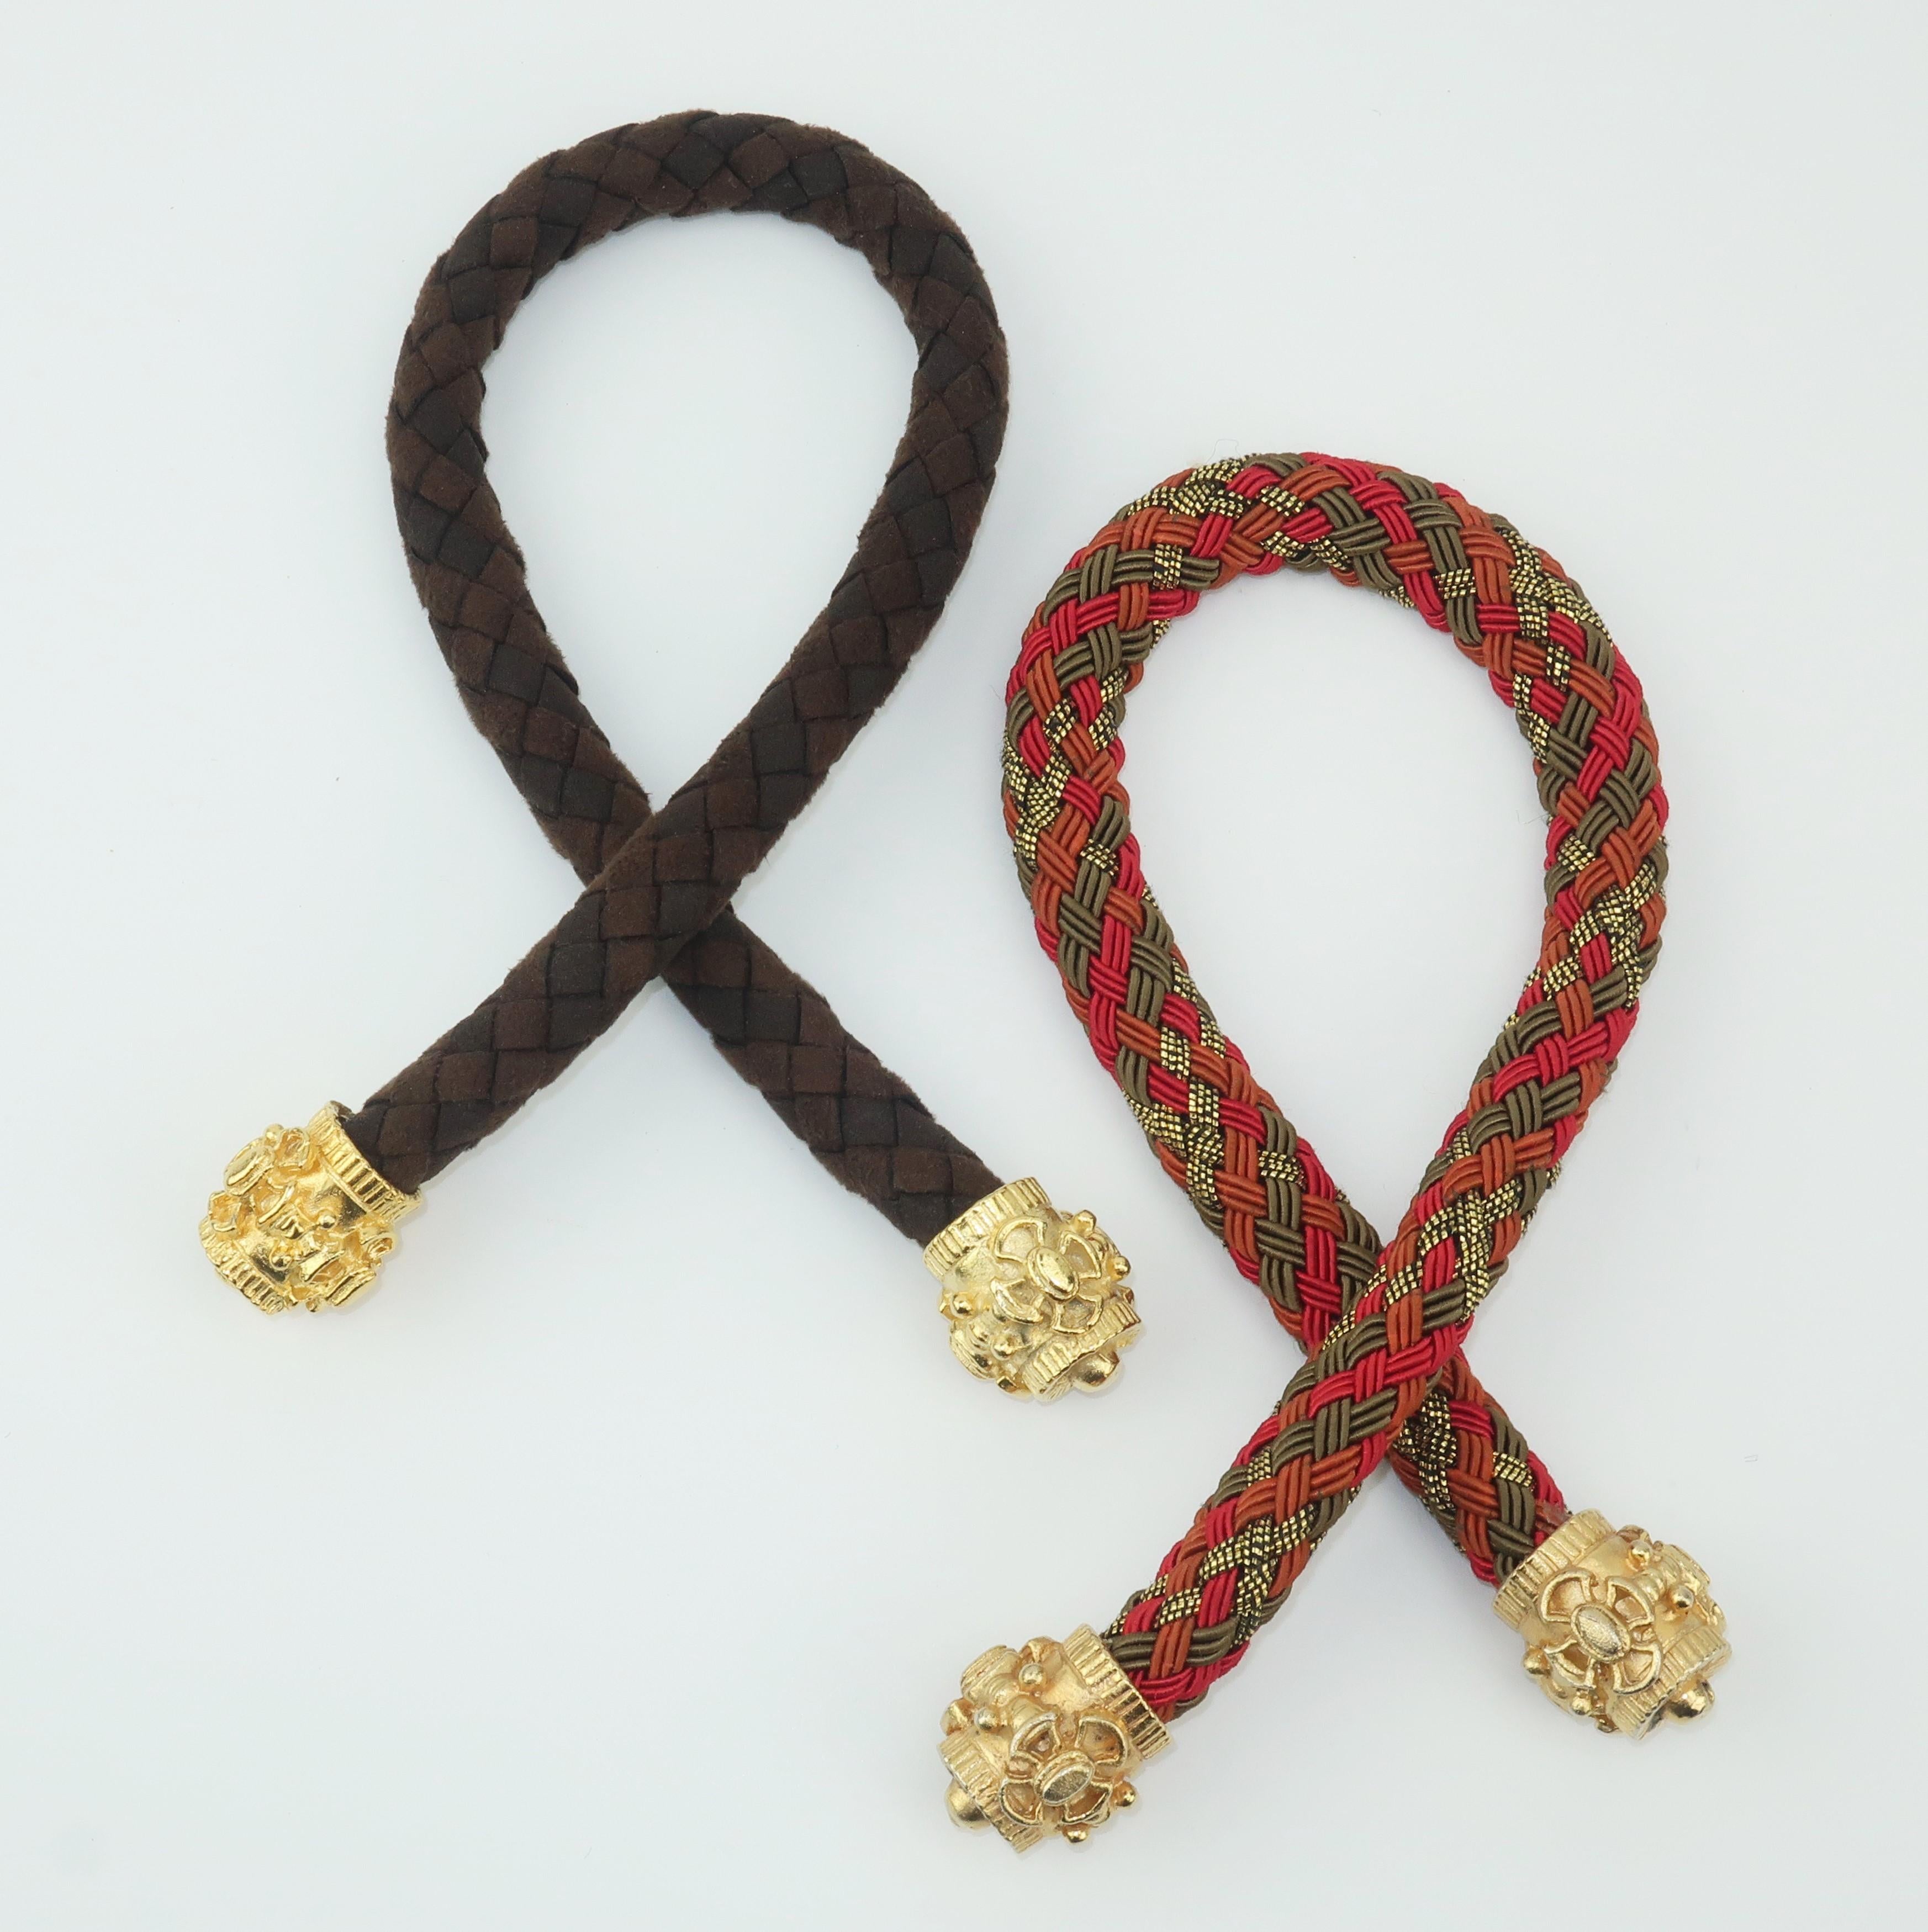 Put a little polish on your pony with these ornate hair ties.  Both pieces are braided with one in a brown ultra suede and the other in a olive green, red, rust and metallic gold silk cord.  Each end is accented with a weighty gold tip with a